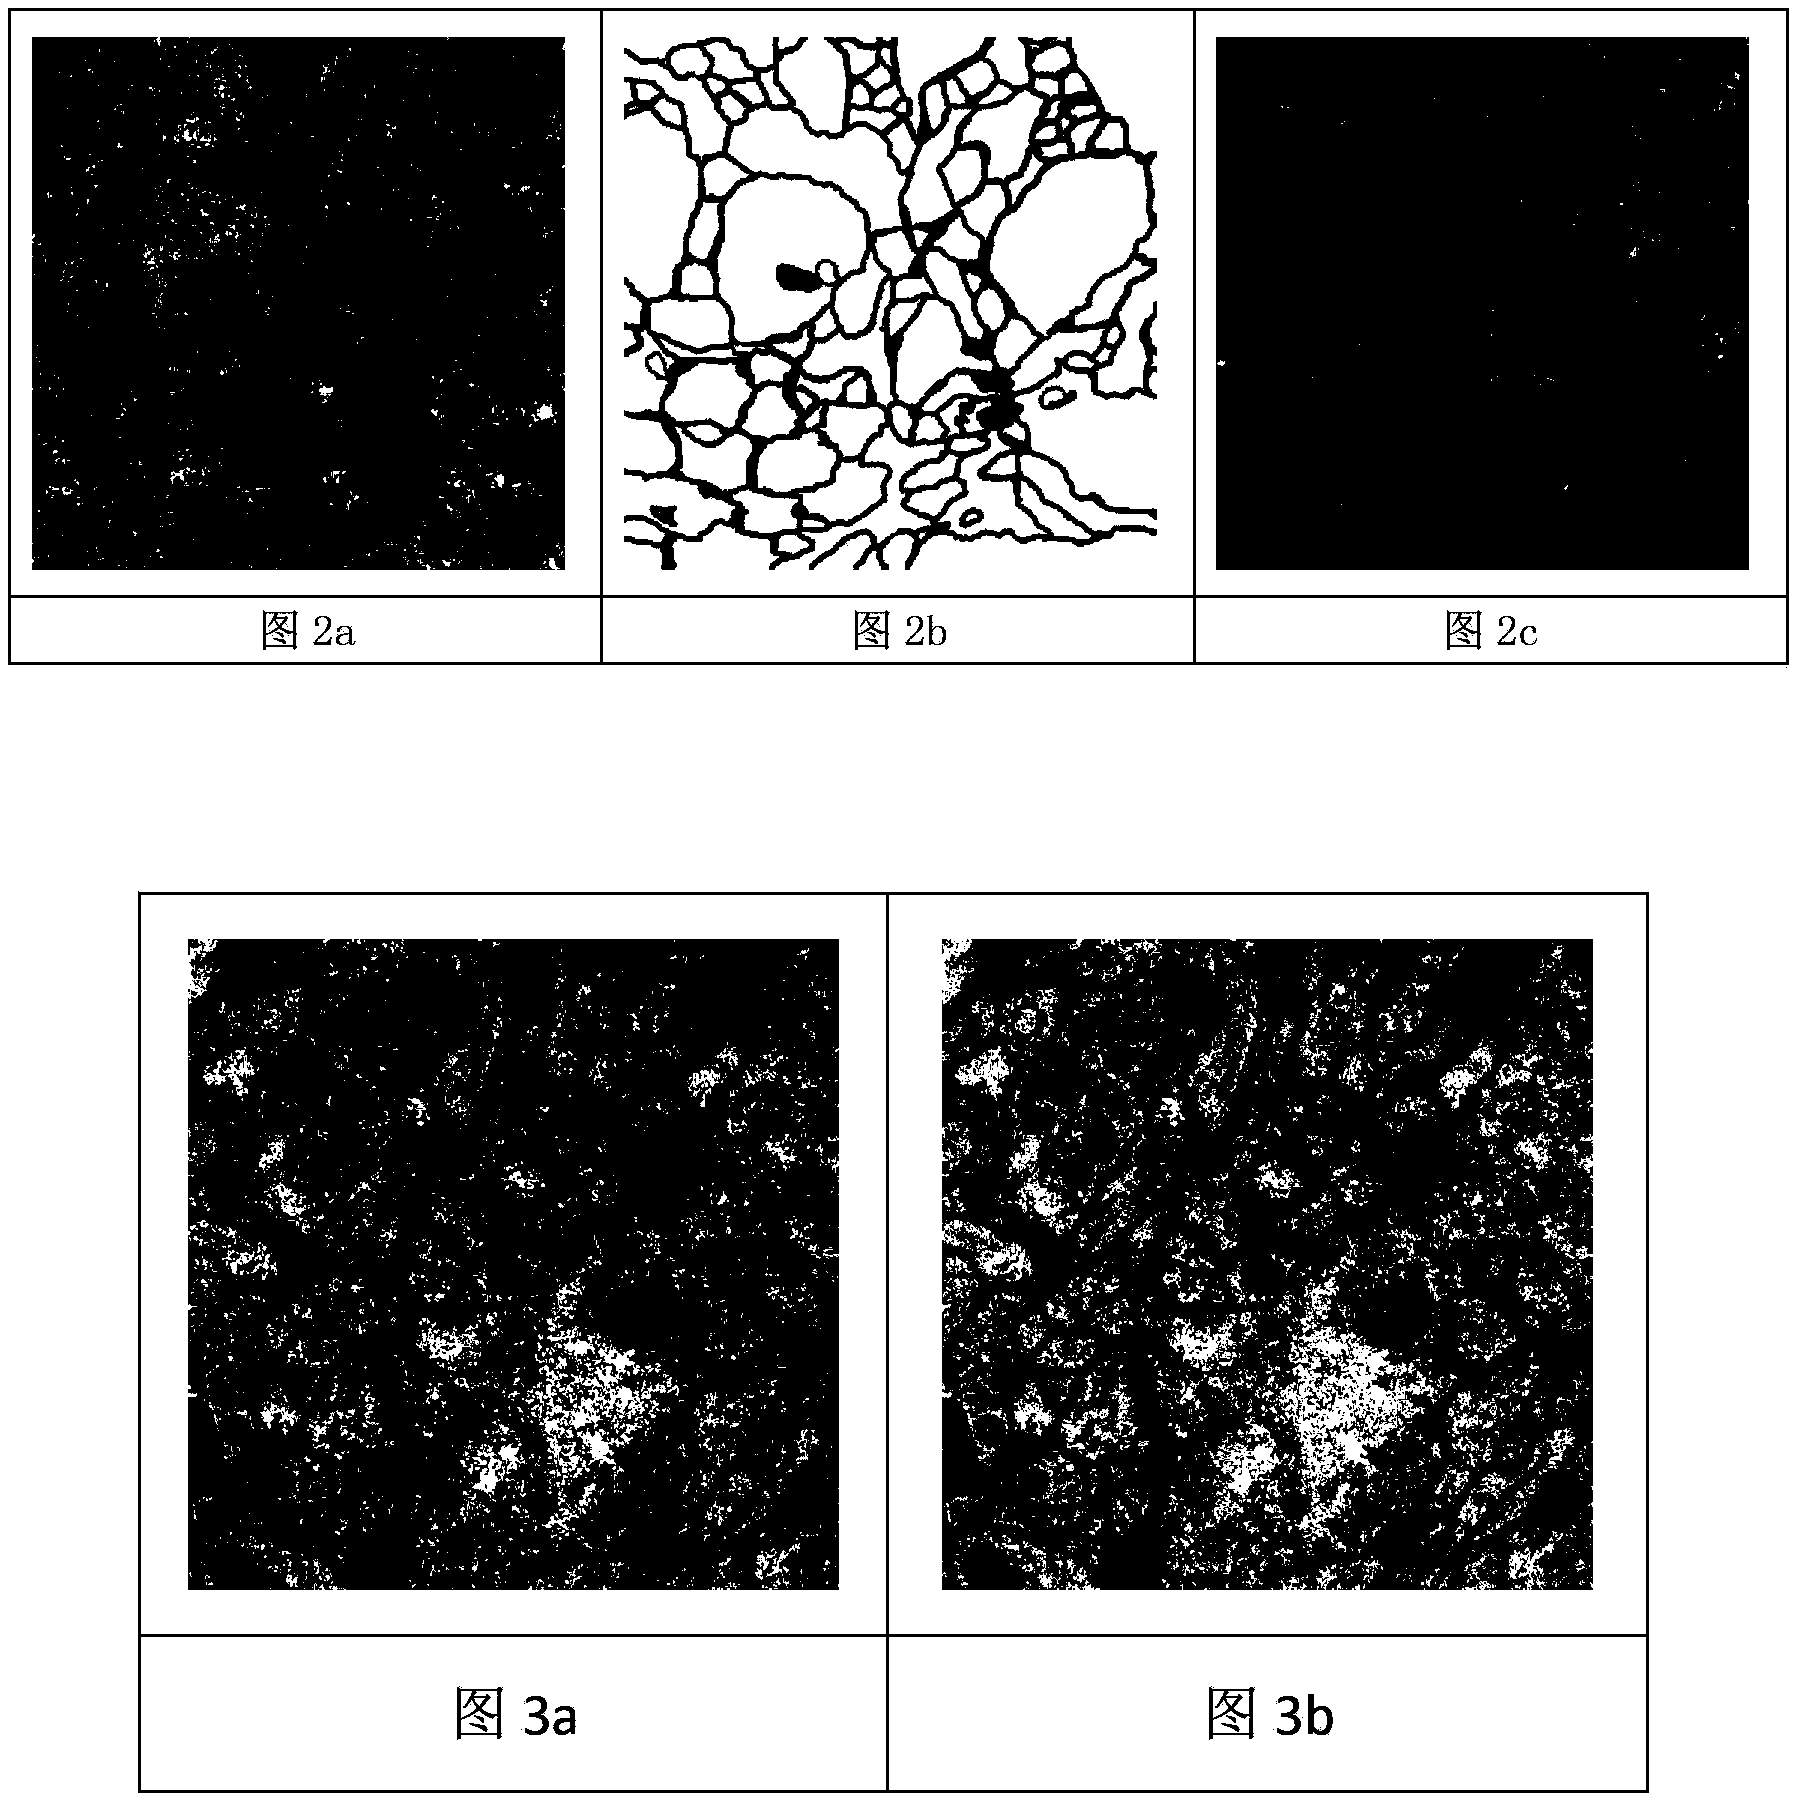 Cell image segmentation method based on automatic feature learning